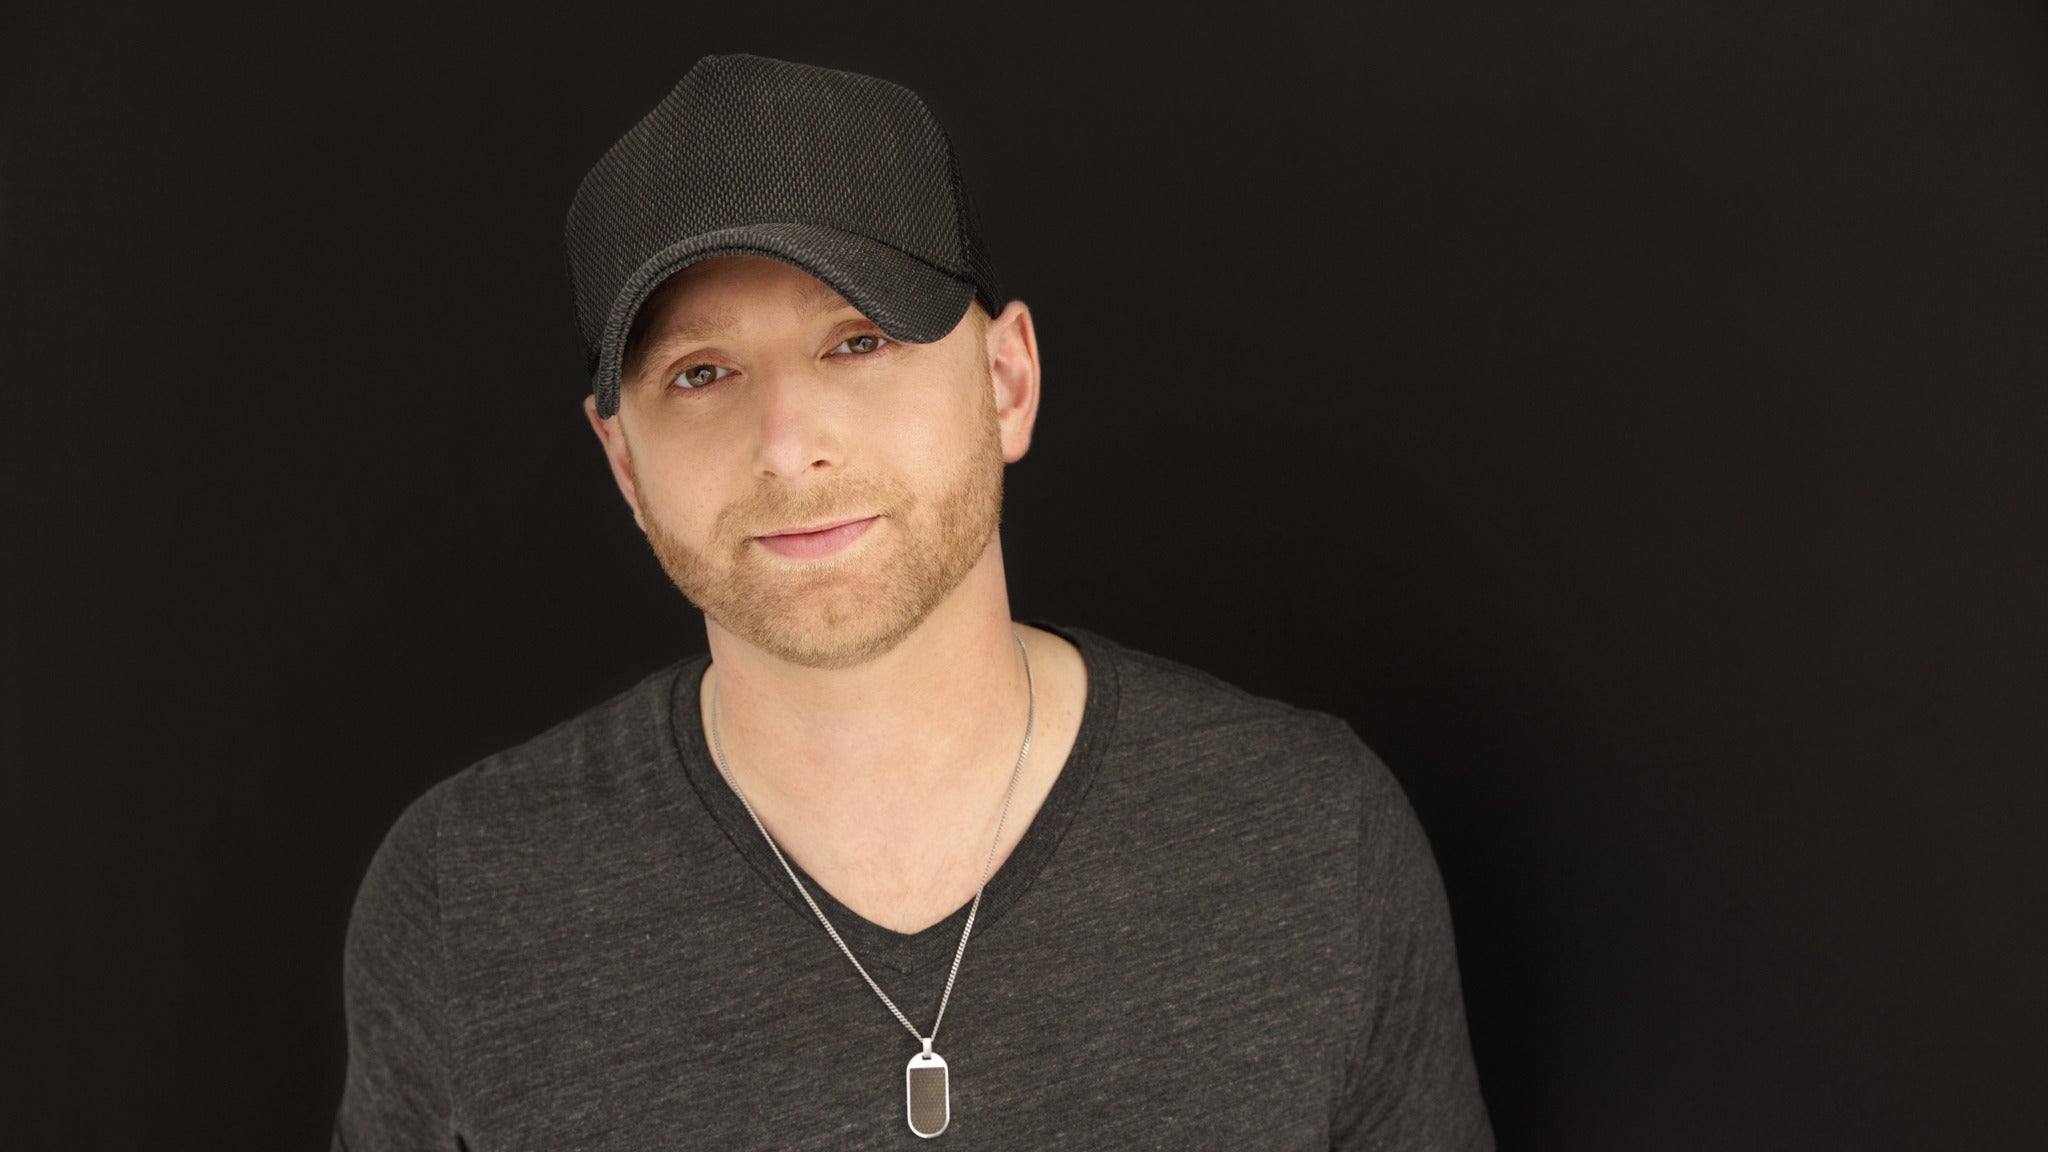 Tim Hicks Wreck This Town World Tour in Kingston promo photo for VENUE presale offer code